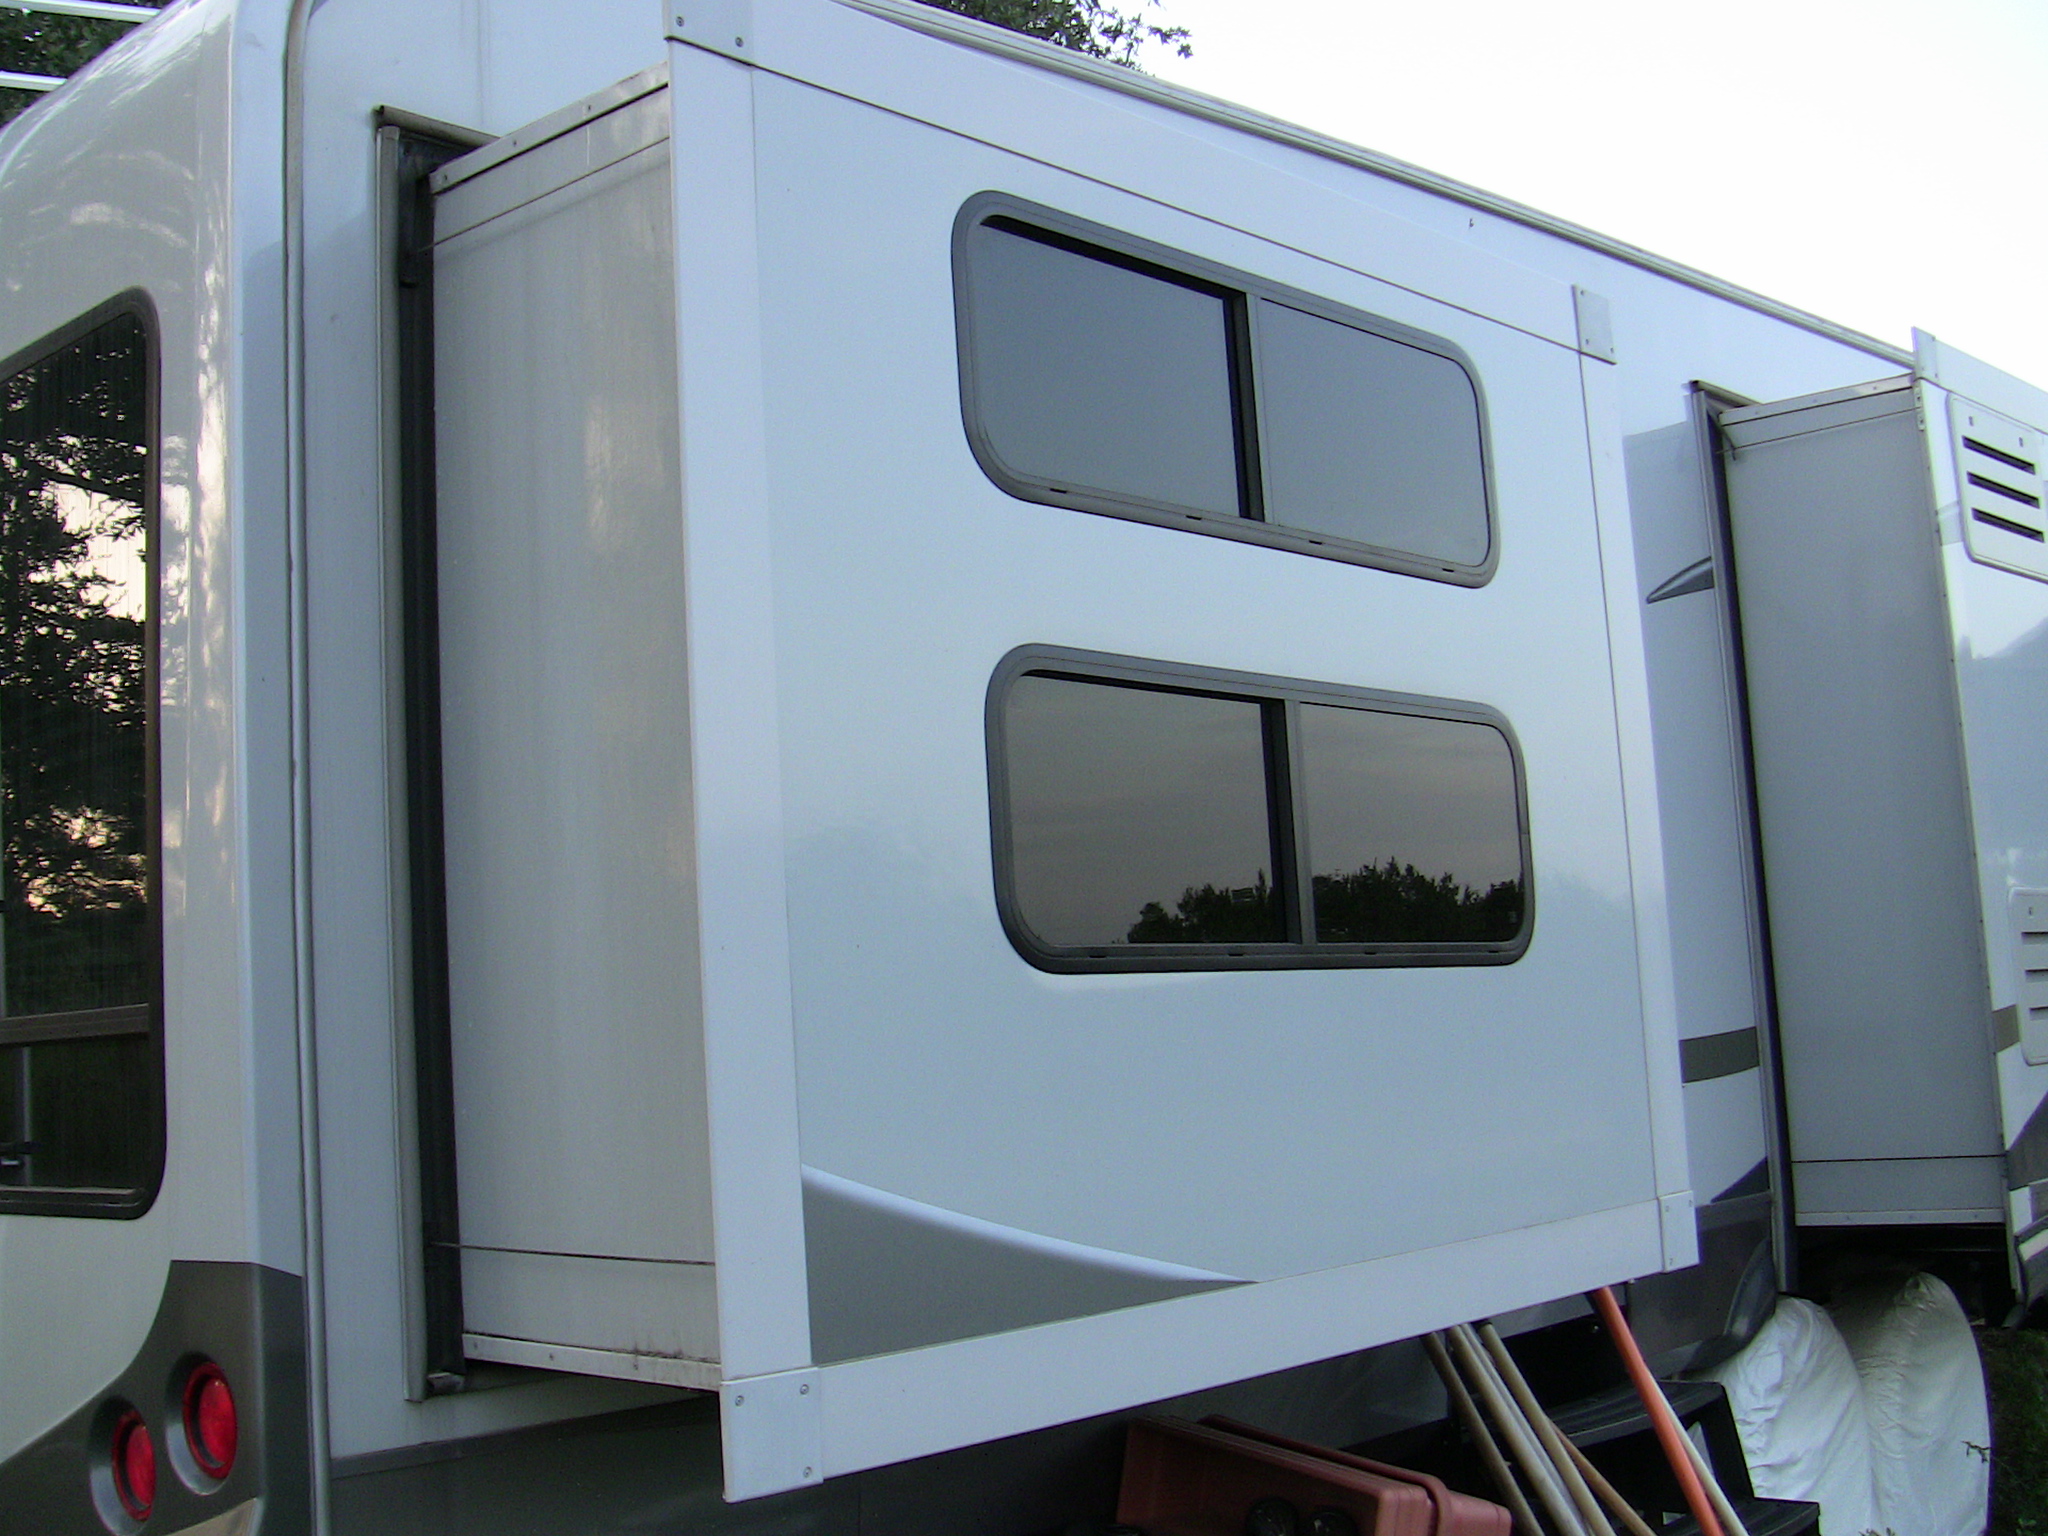 A Reader Asks Should My RV Slide Out Sag What Are Some